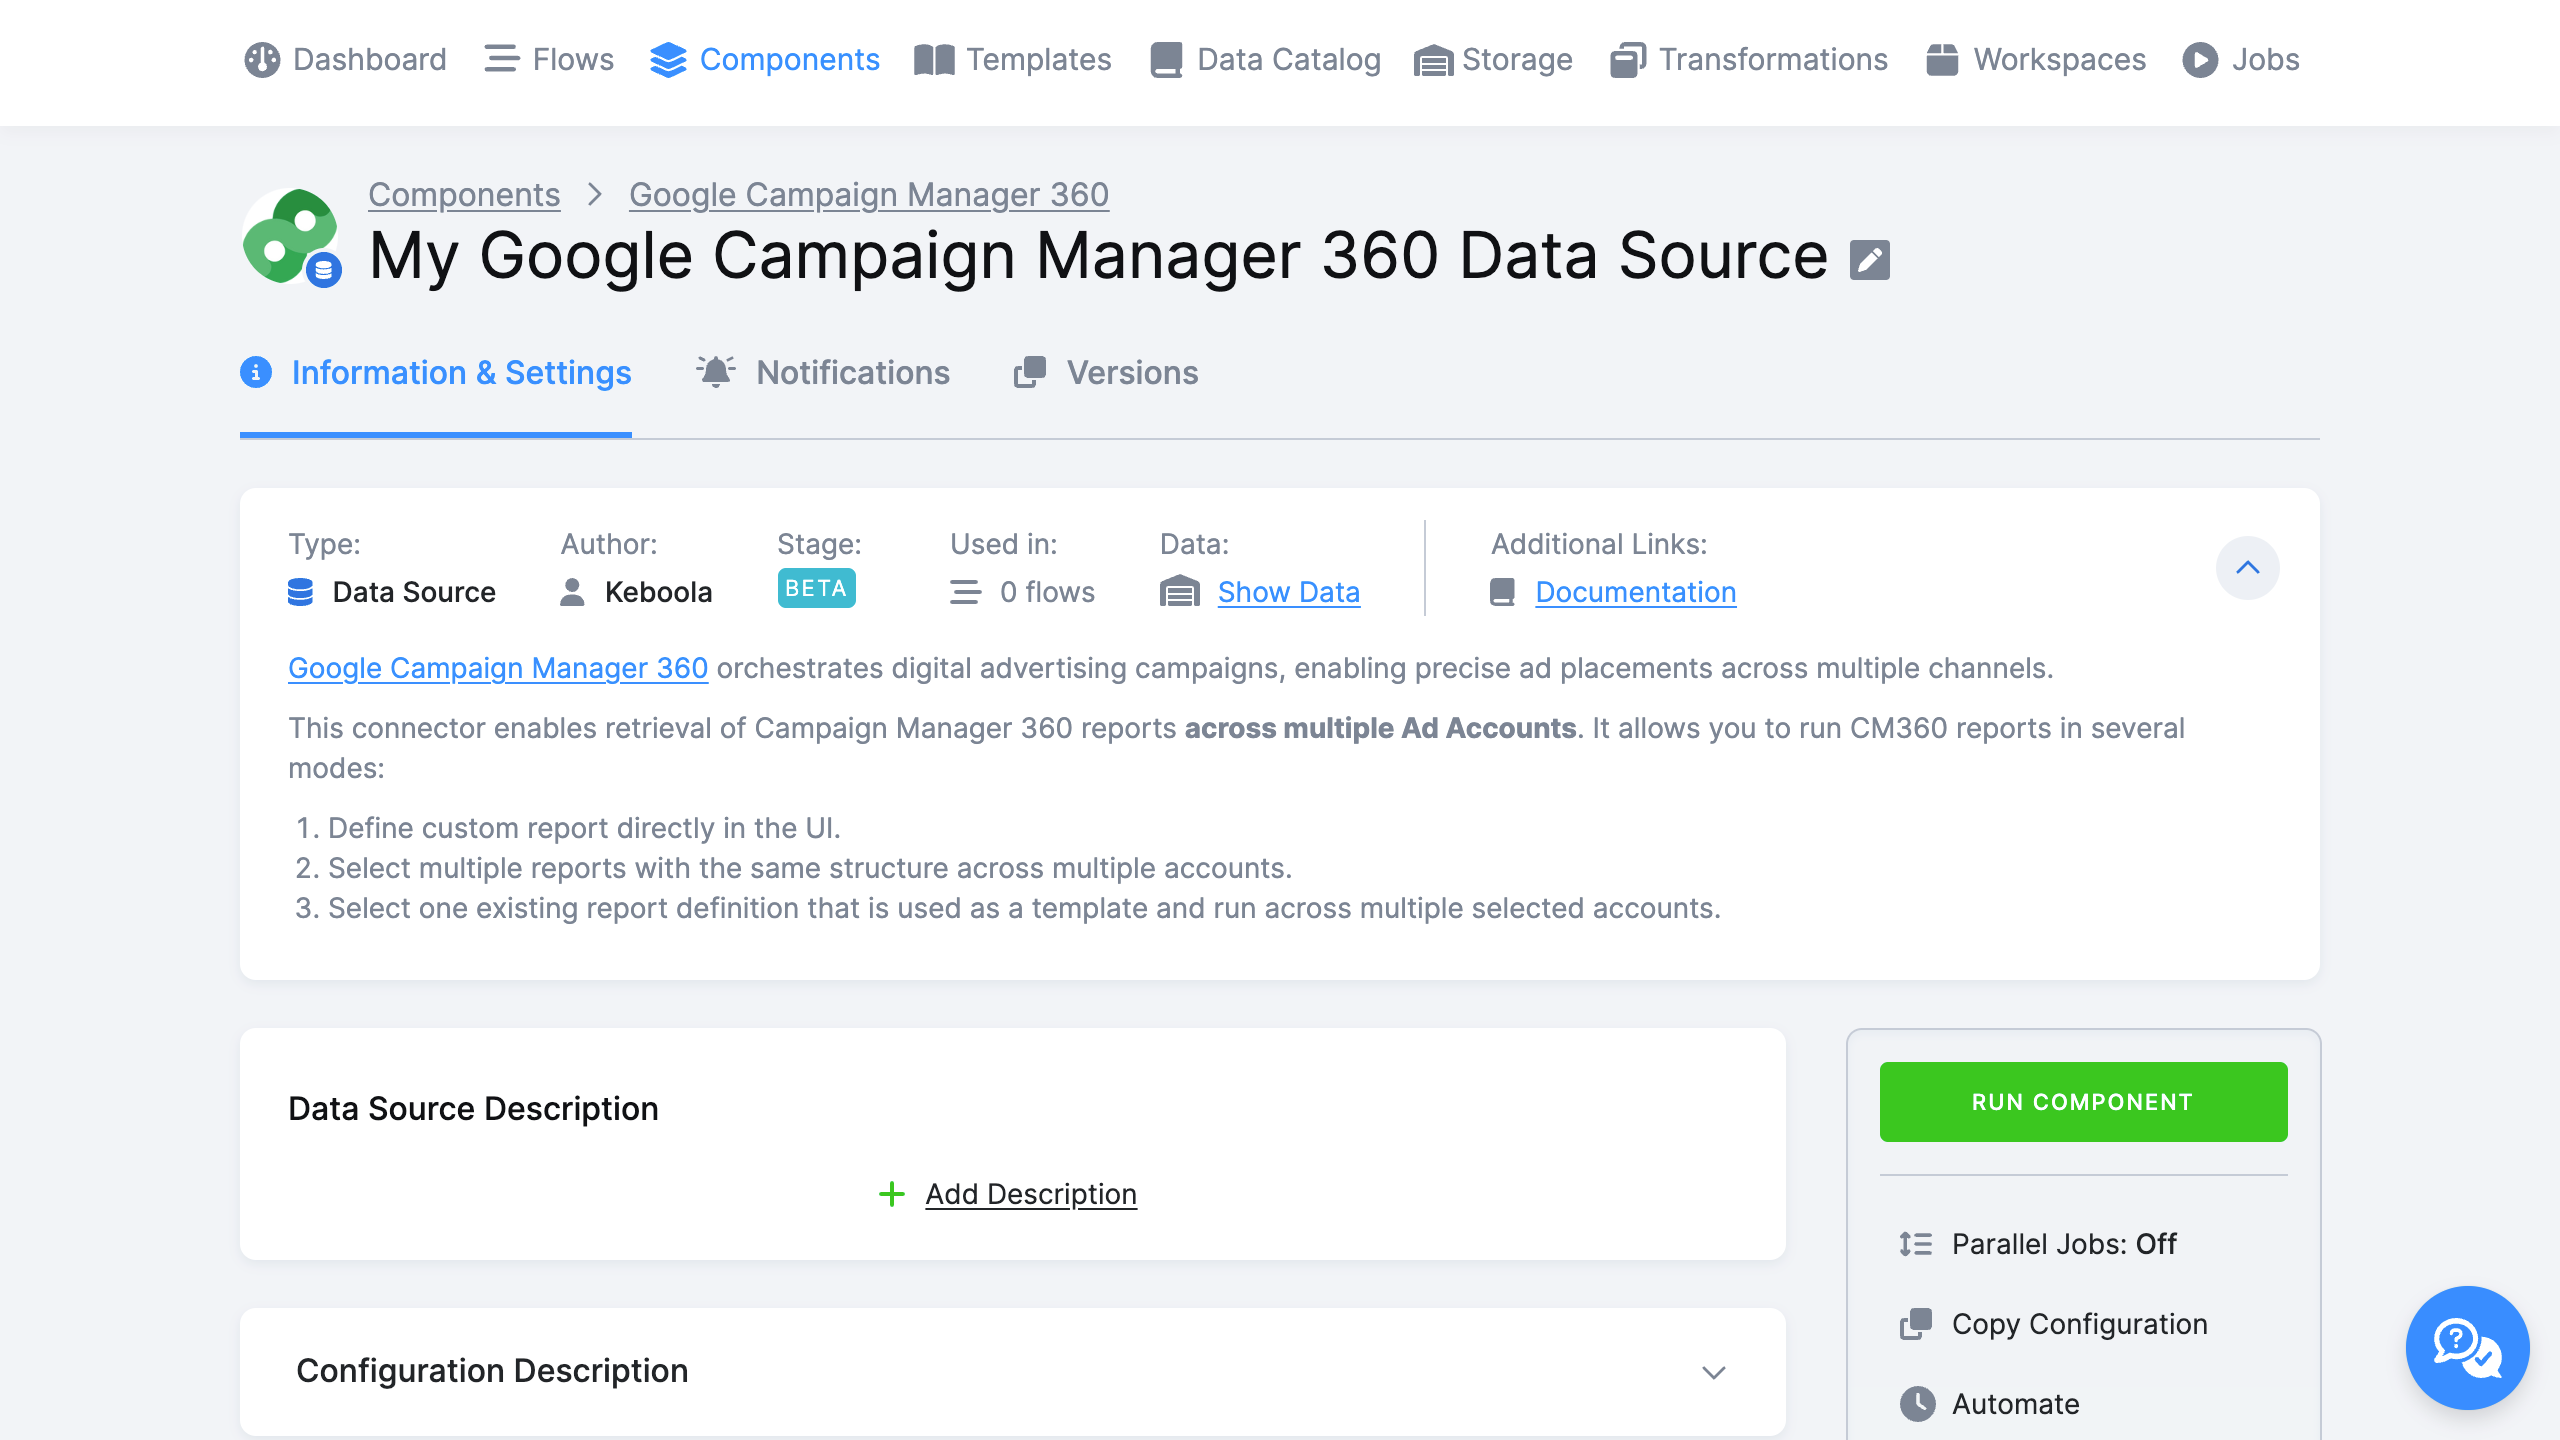 New Data Source for Google Campaign Manager 360